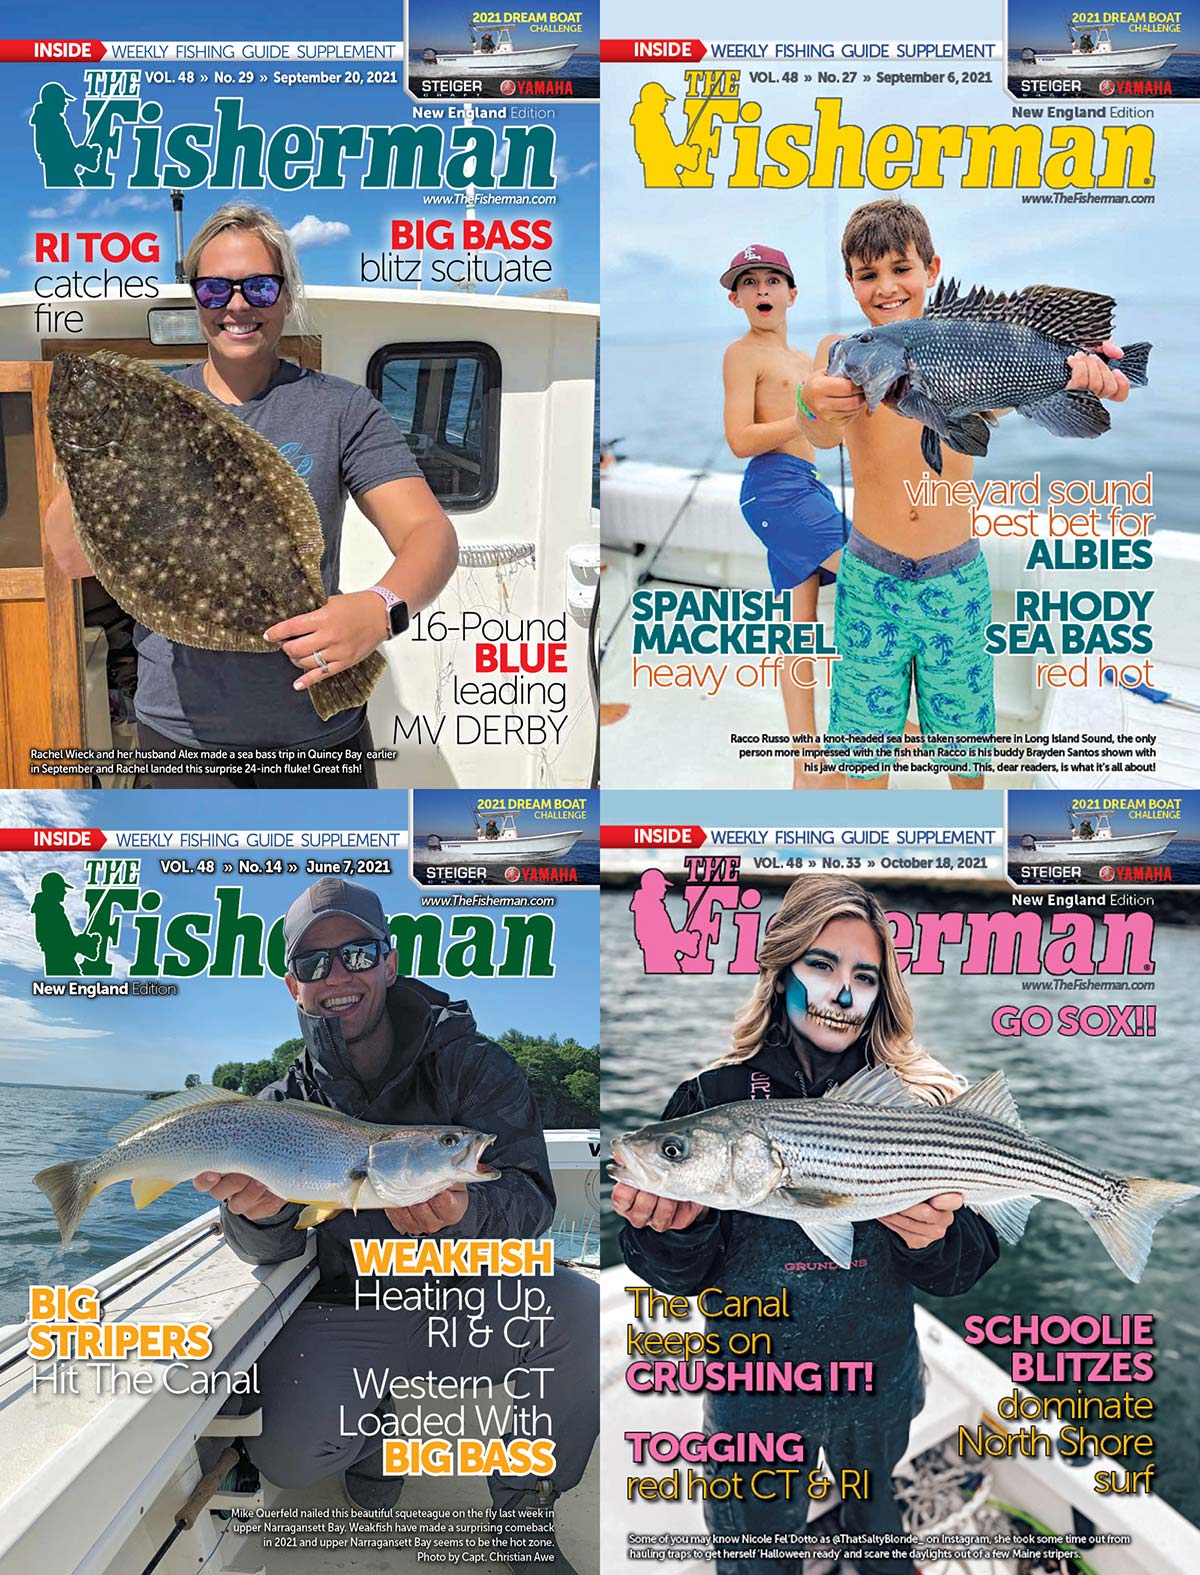 Weekly Digital Editions Resume This Month - The Fisherman